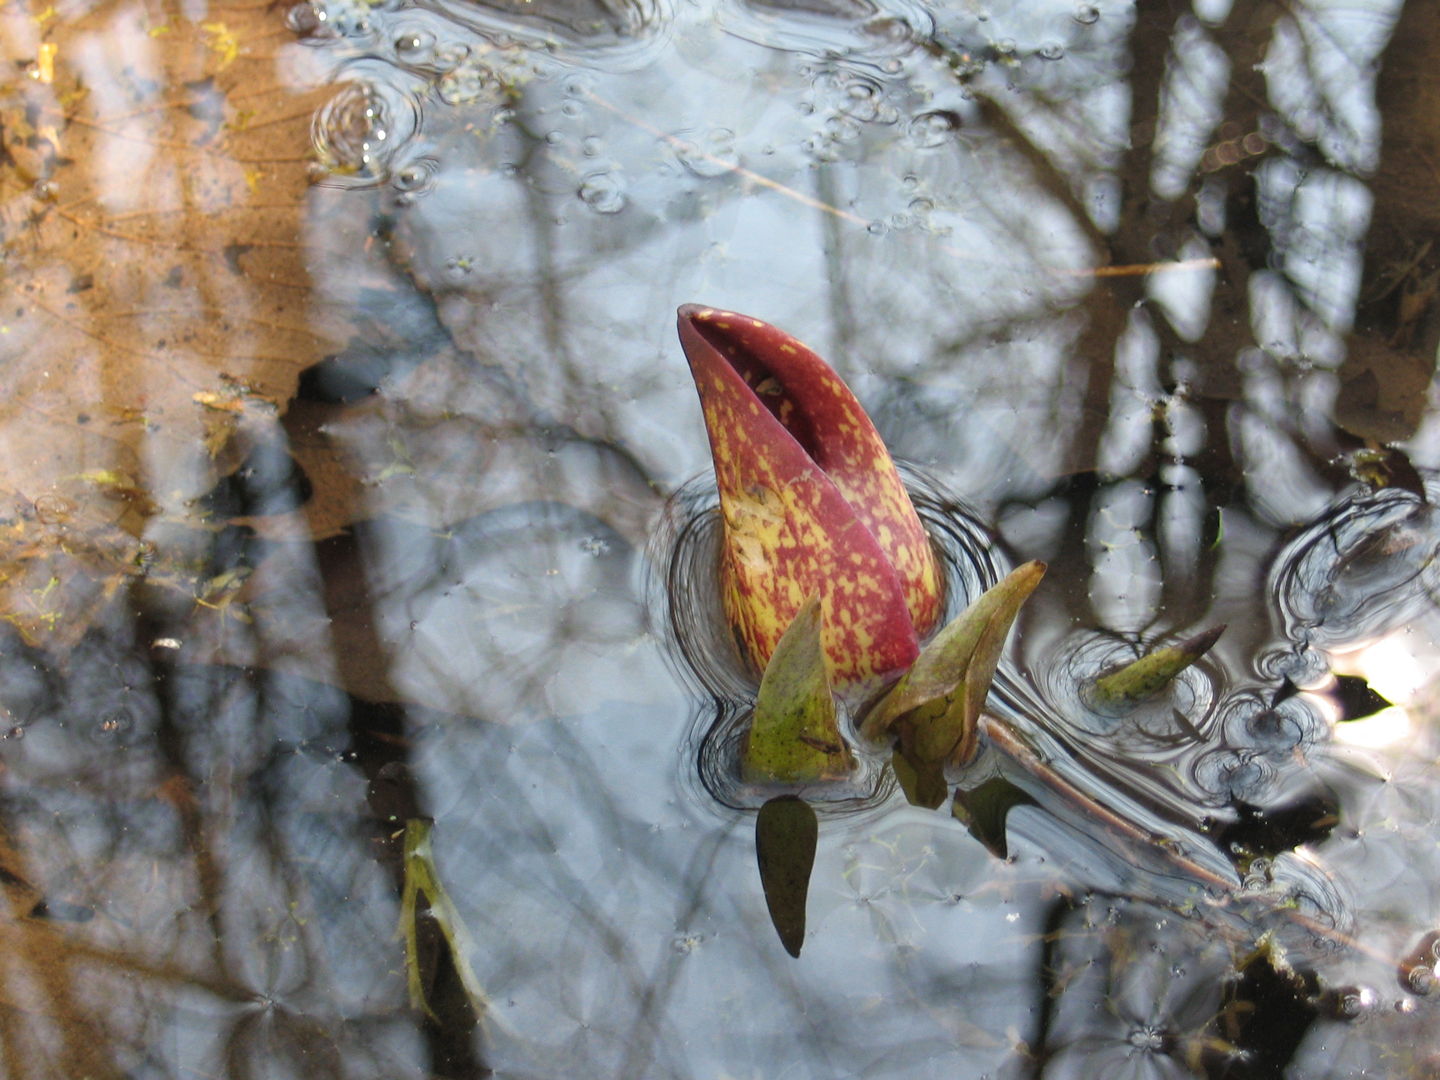 Skunk cabbage survives very comfortably, even when waterlogged. Photo by Andrea Krava